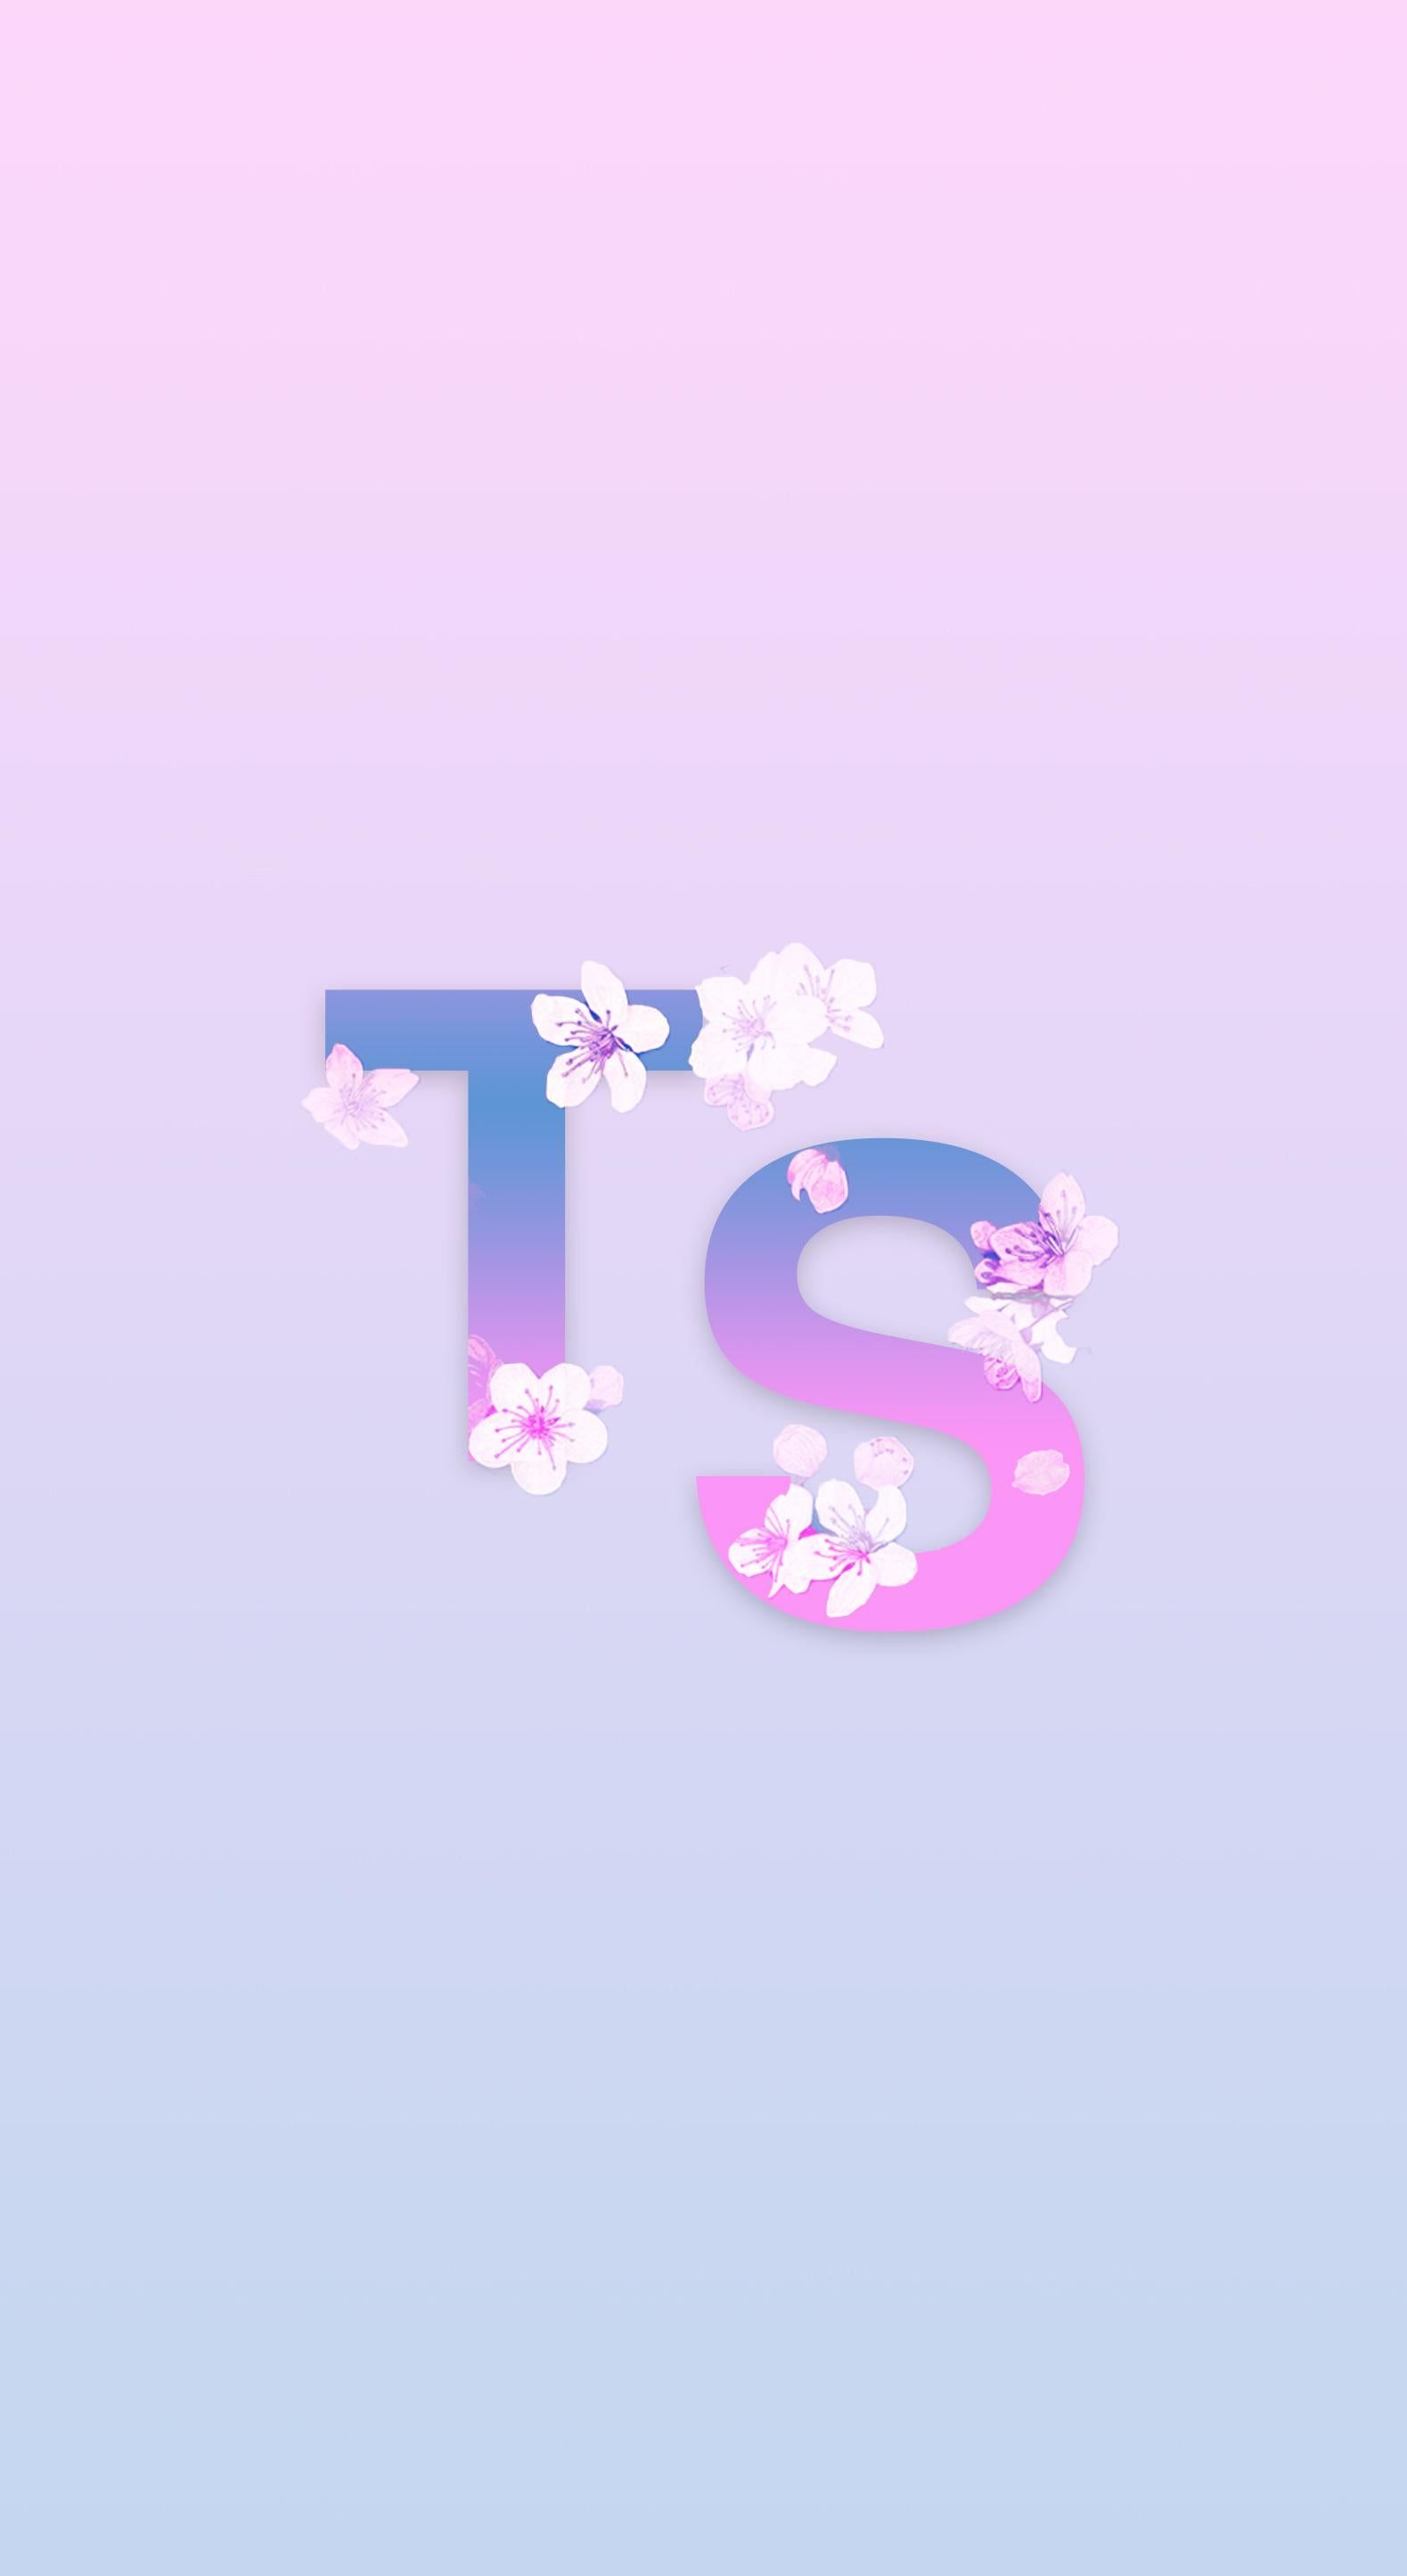 Iphone wallpaper of the letters T and S with flowers - Taylor Swift